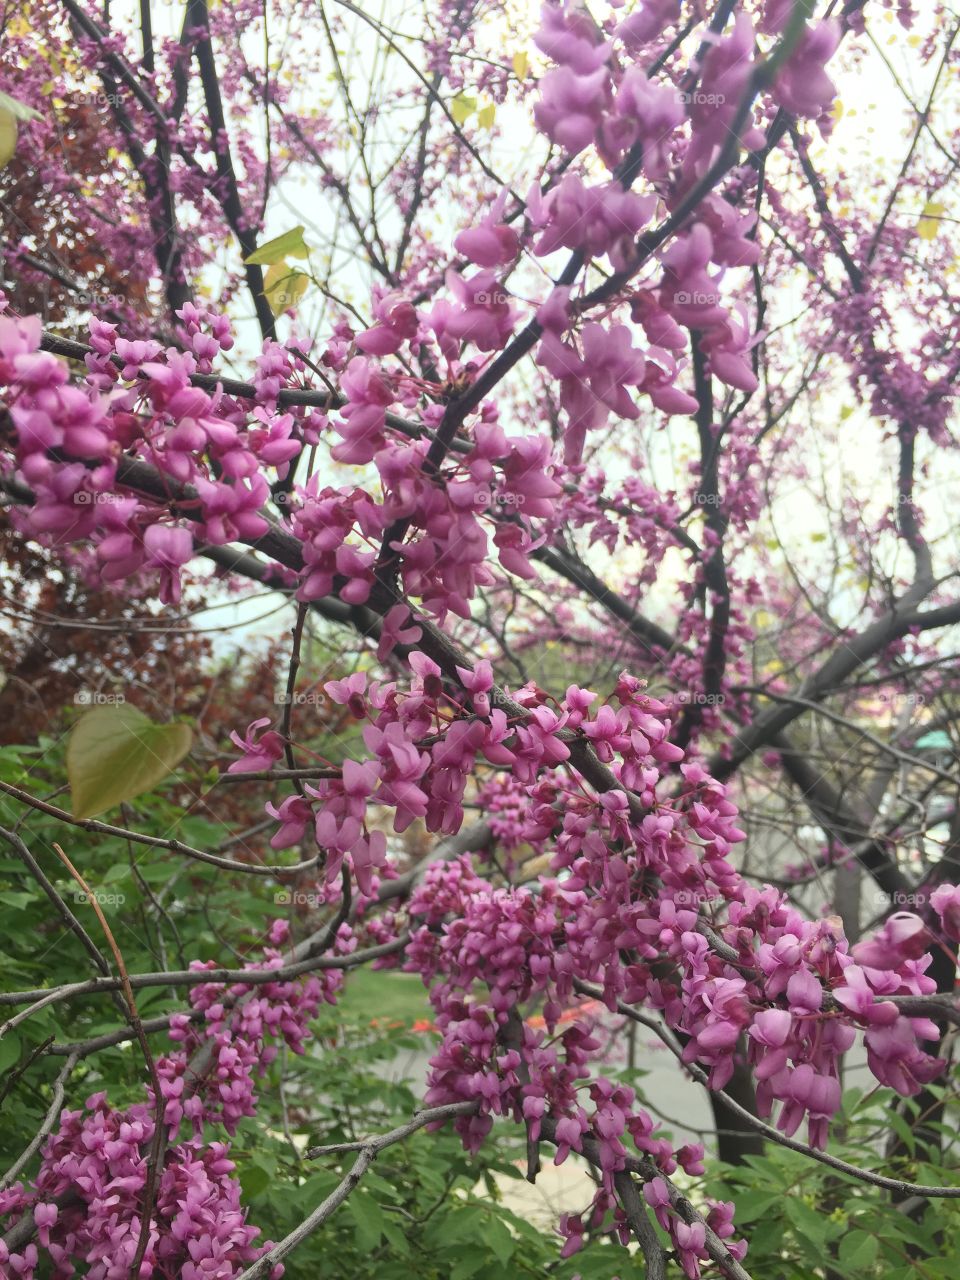 Pink spring blossoms. Possibly cherry blossoms?